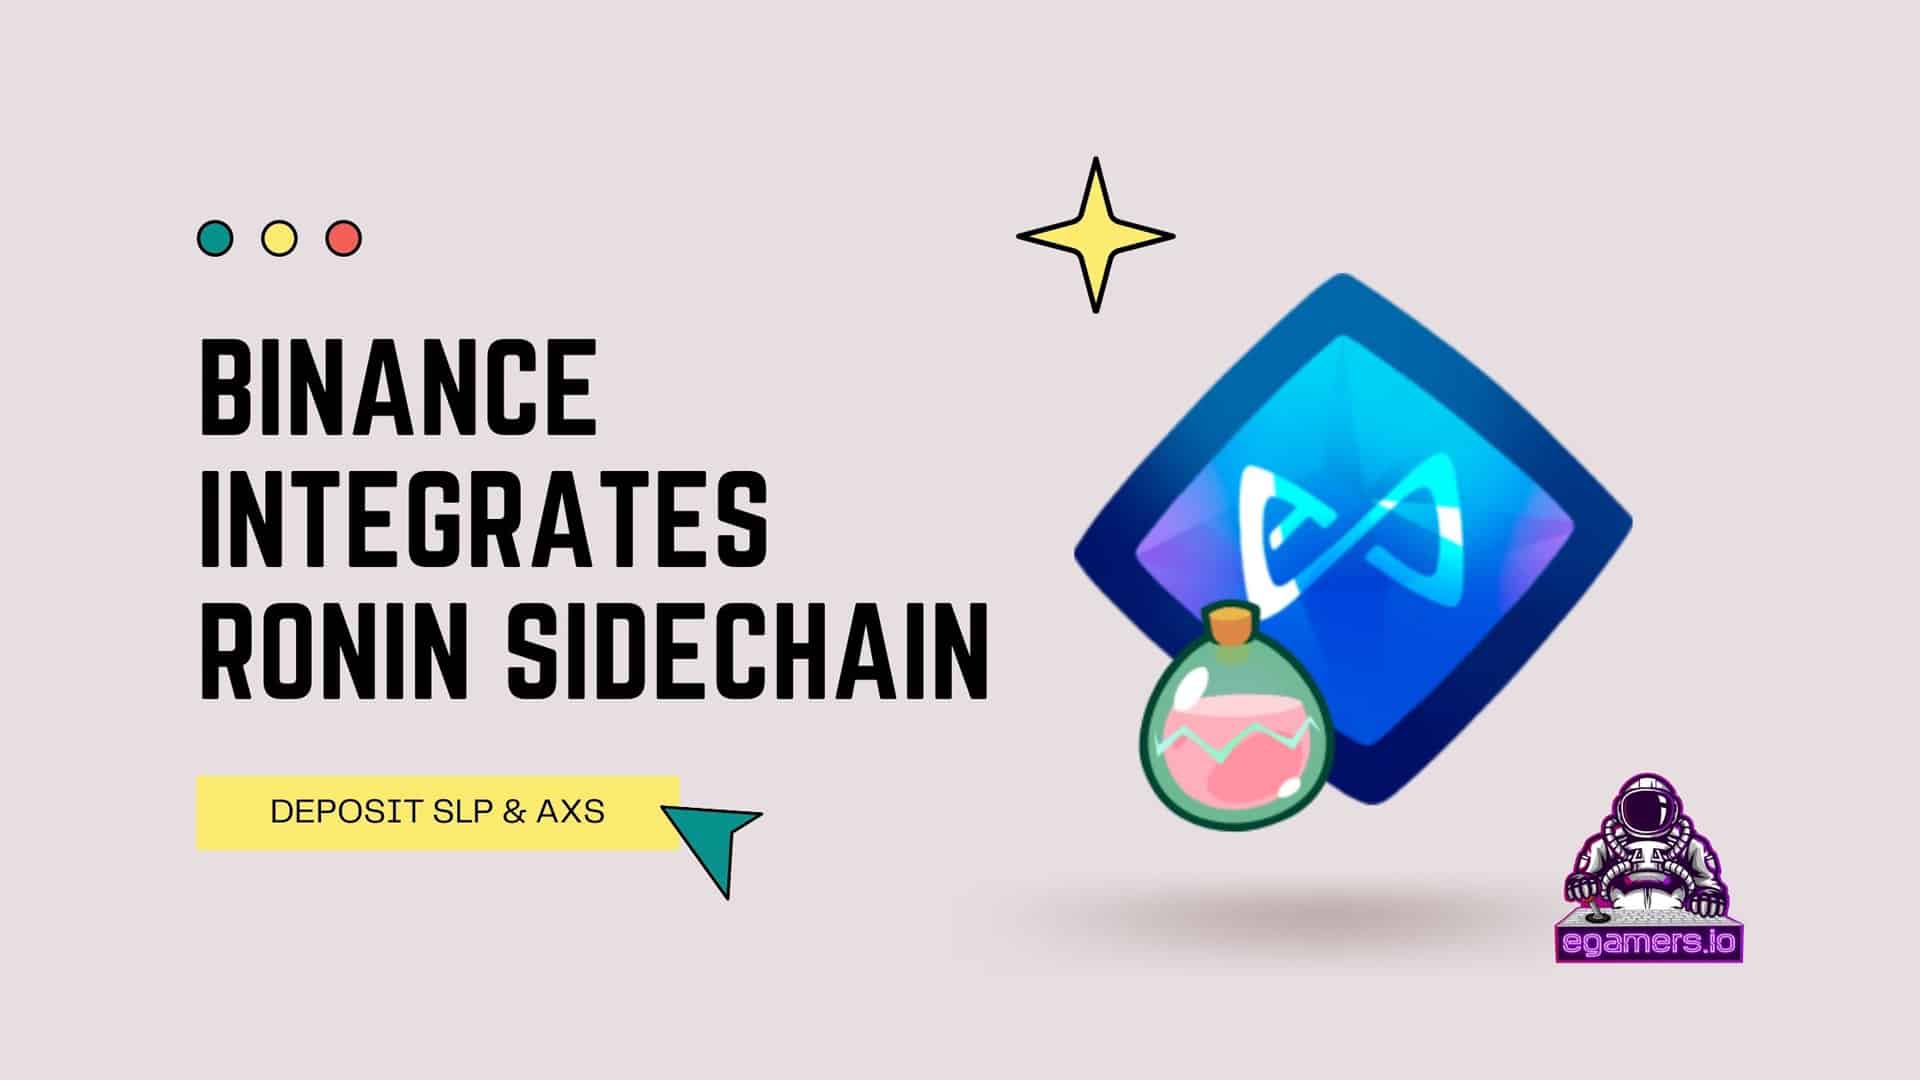 binance ronin Binance, one of the leading cryptocurrency exchanges has announced today, 2/9/21 the support of Ronin sidechain, a layer-2 solution developed by Sky Mavis that serves the Axie Infinity game and its upcoming ecosystem.